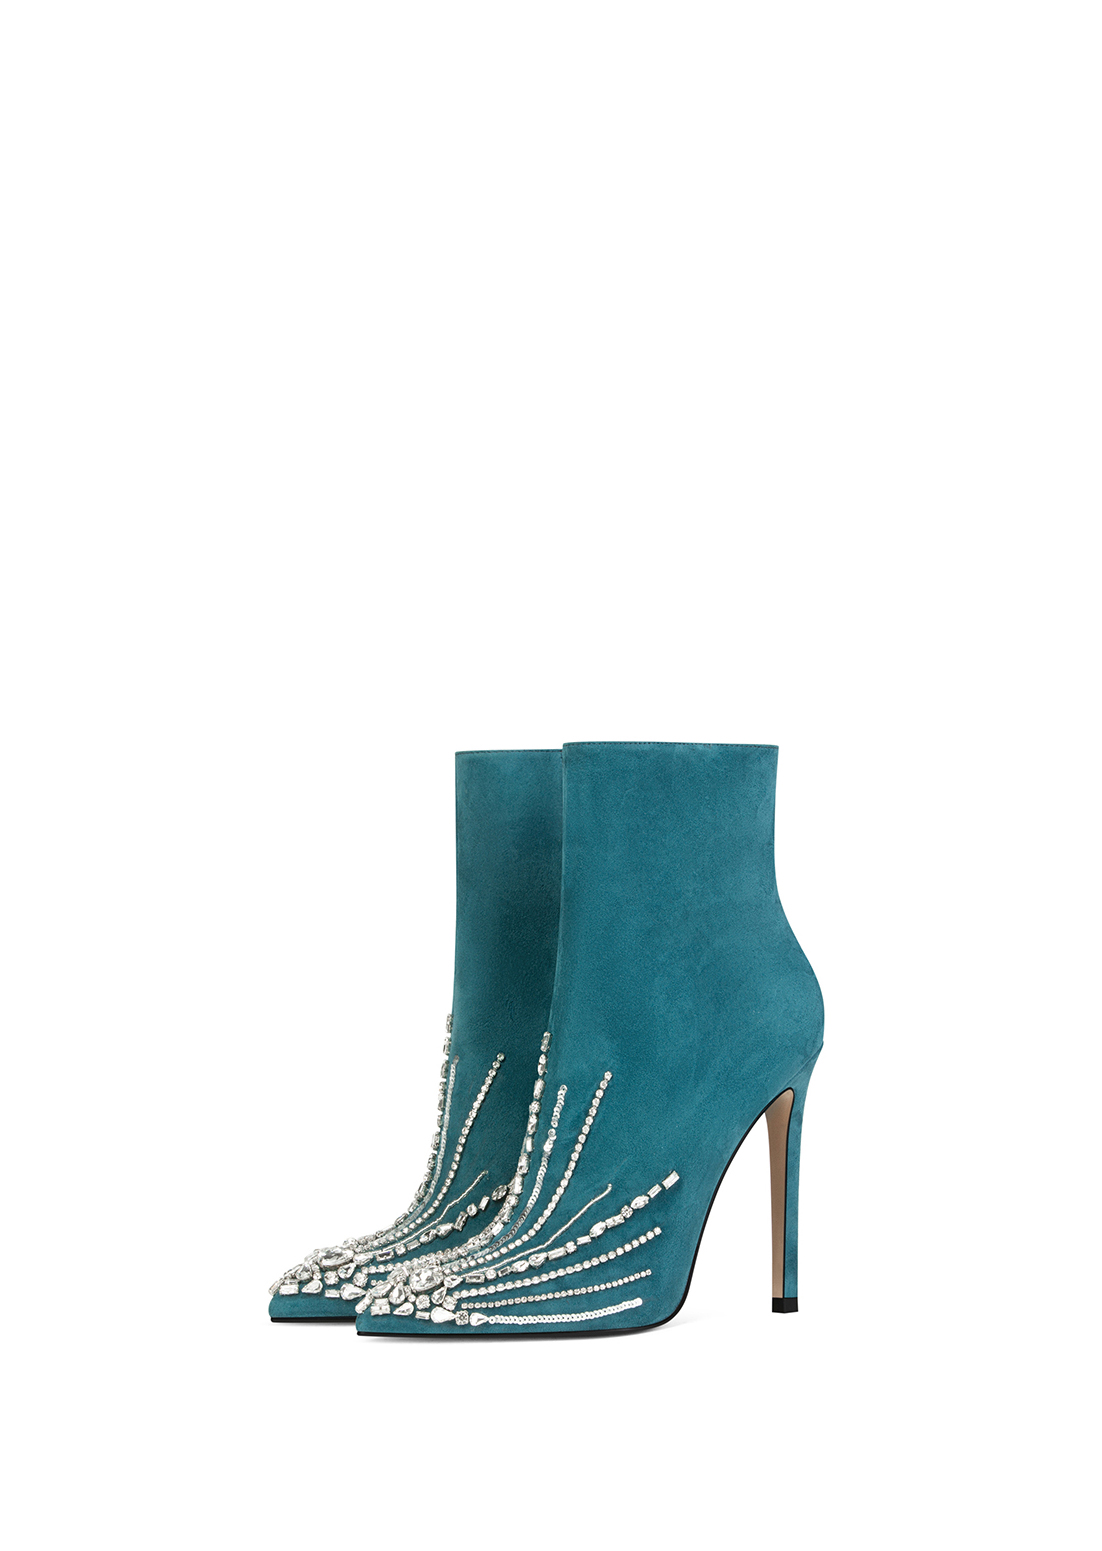 Blue women ankle boots with diamond-tipped and stylish zip  (5)